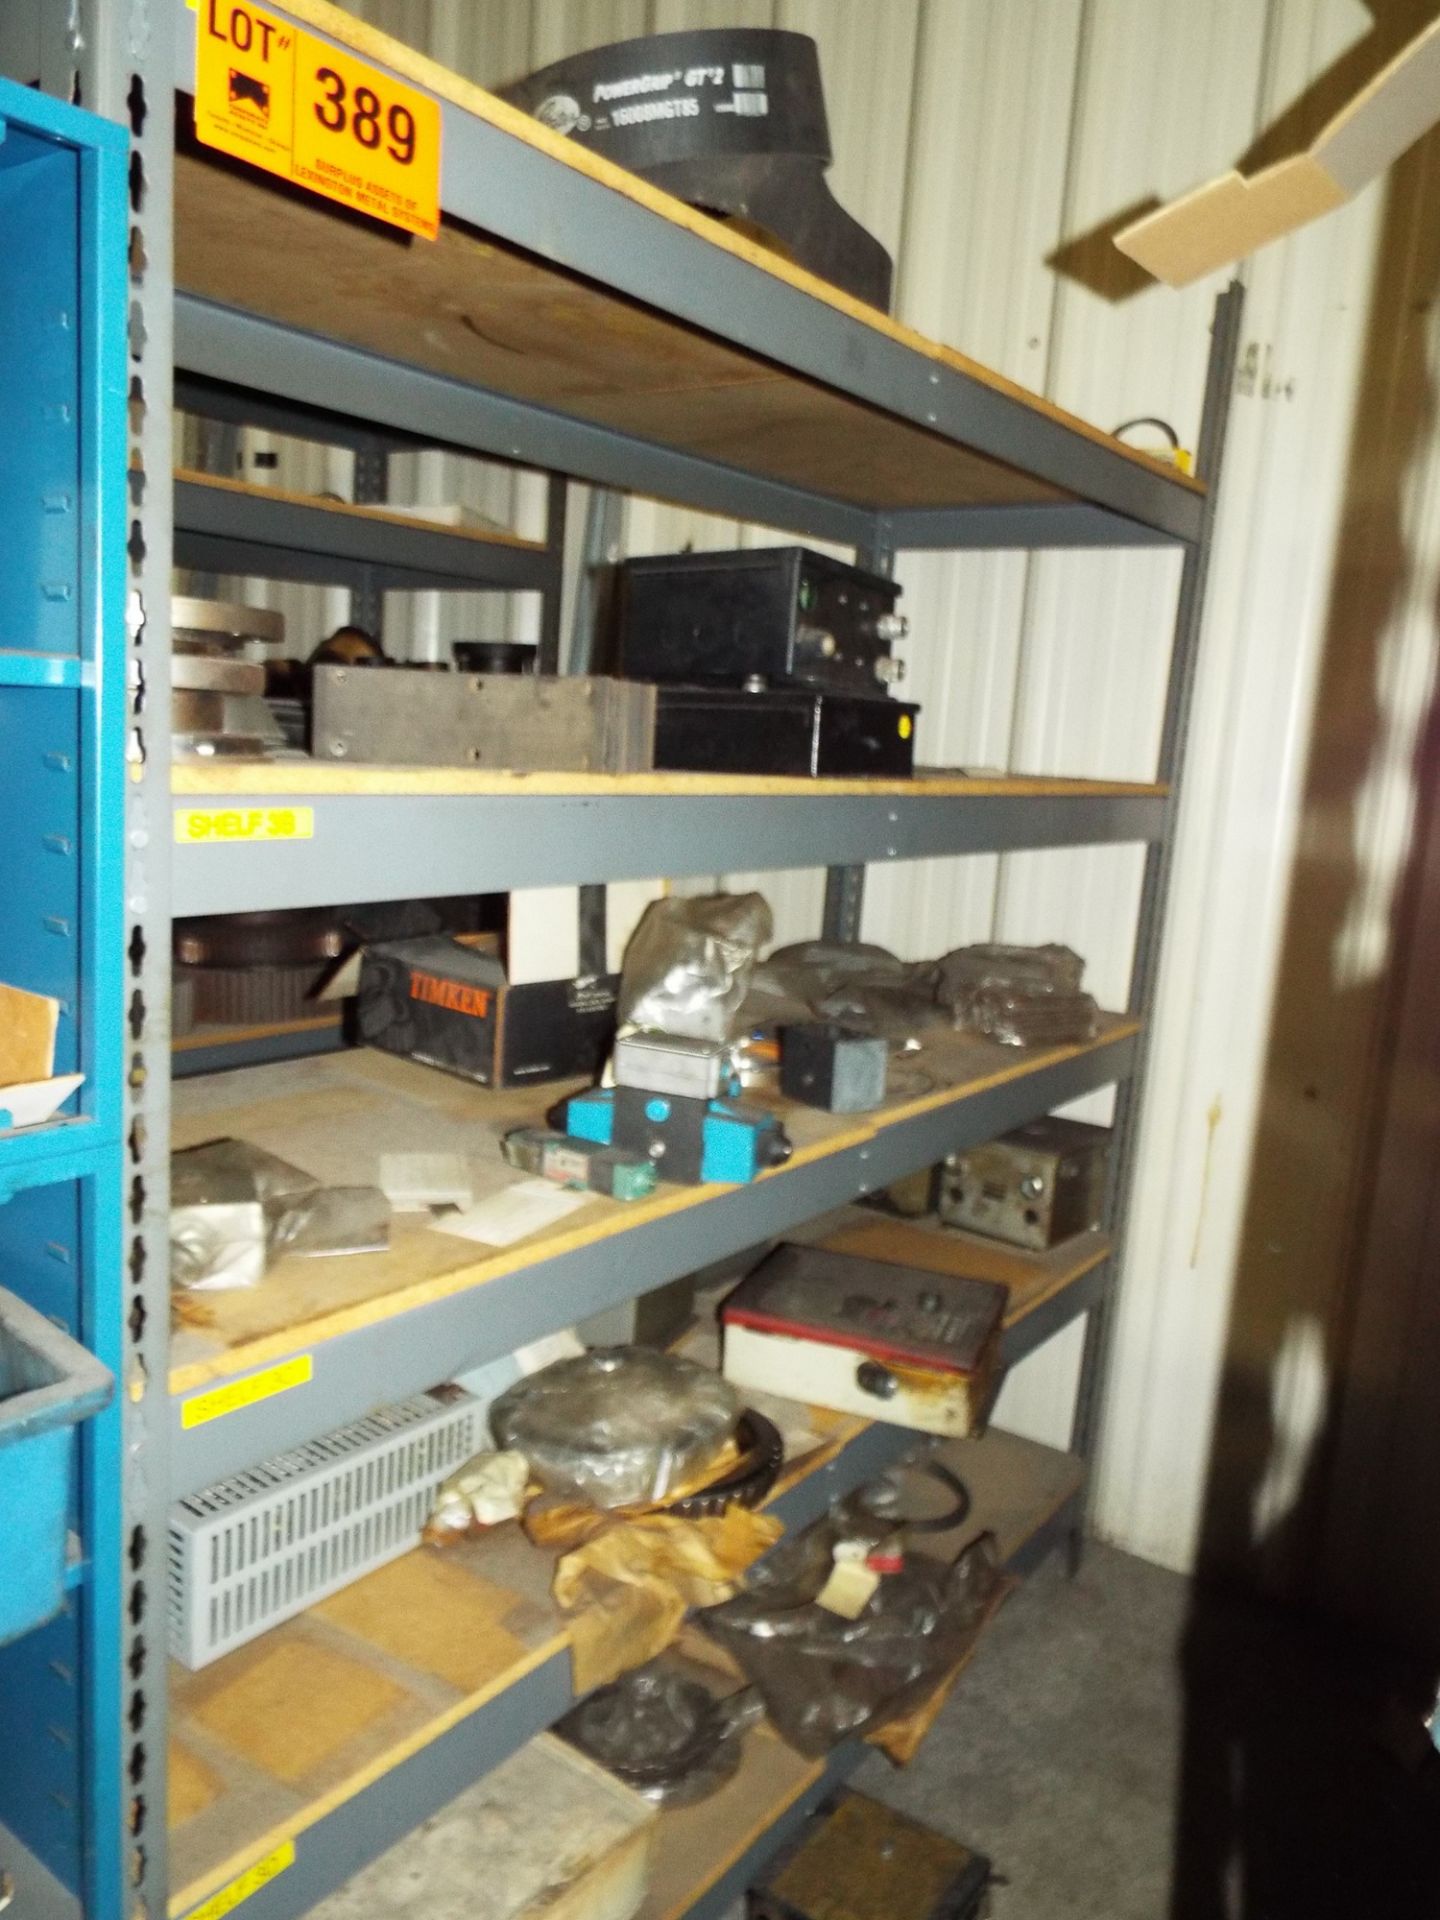 LOT/ SHELF WITH CONTENTS - BEARINGS, PLC COMPONENTS, GEARS, BELTS, CONTROL BOXES, SPARE PARTS